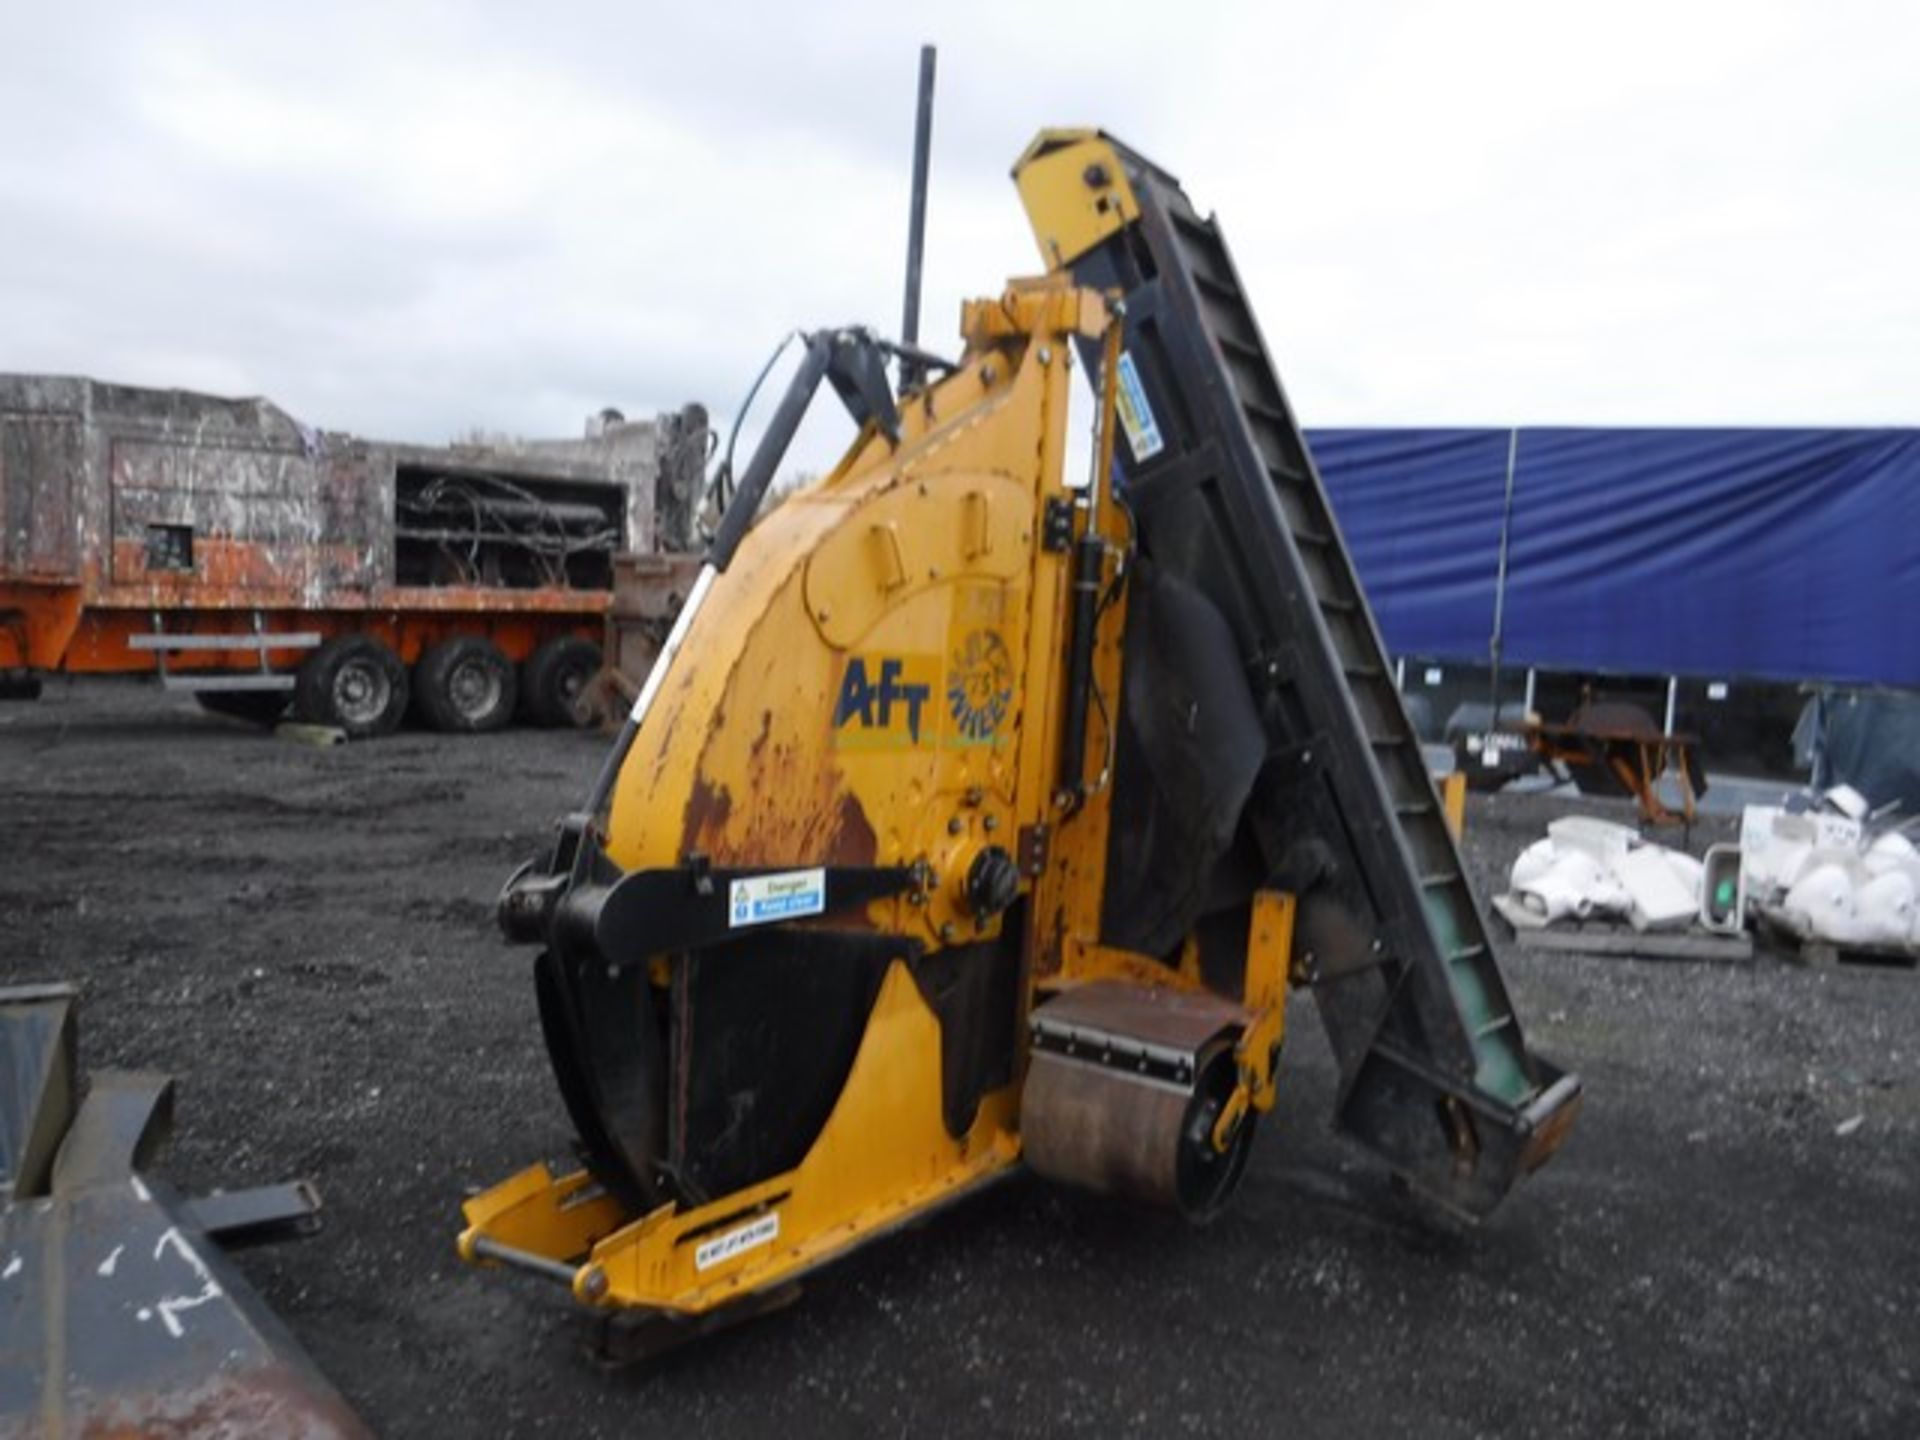 A.F.T. WIZZ WHEEL AFT75 trencher c/w side driving conveyor, pipe reel and gravel box S/N AO68 2013 - Bild 4 aus 5